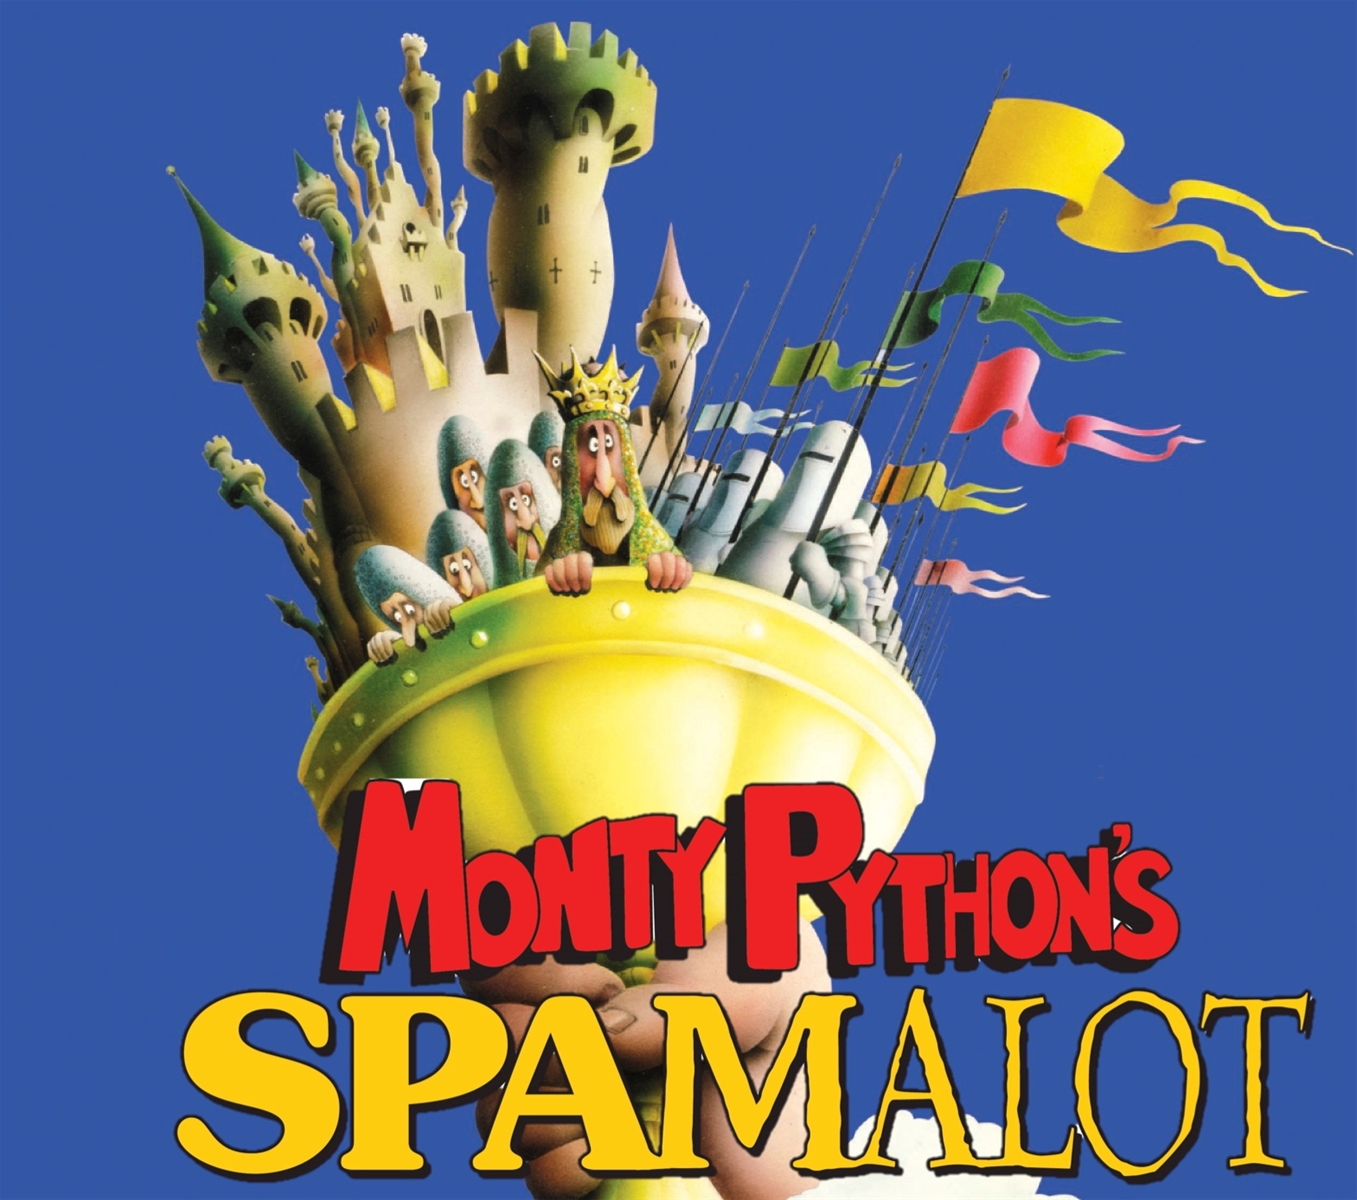 MONTY PYTHON’S SPAMALOT at the Belgrade, Coventry